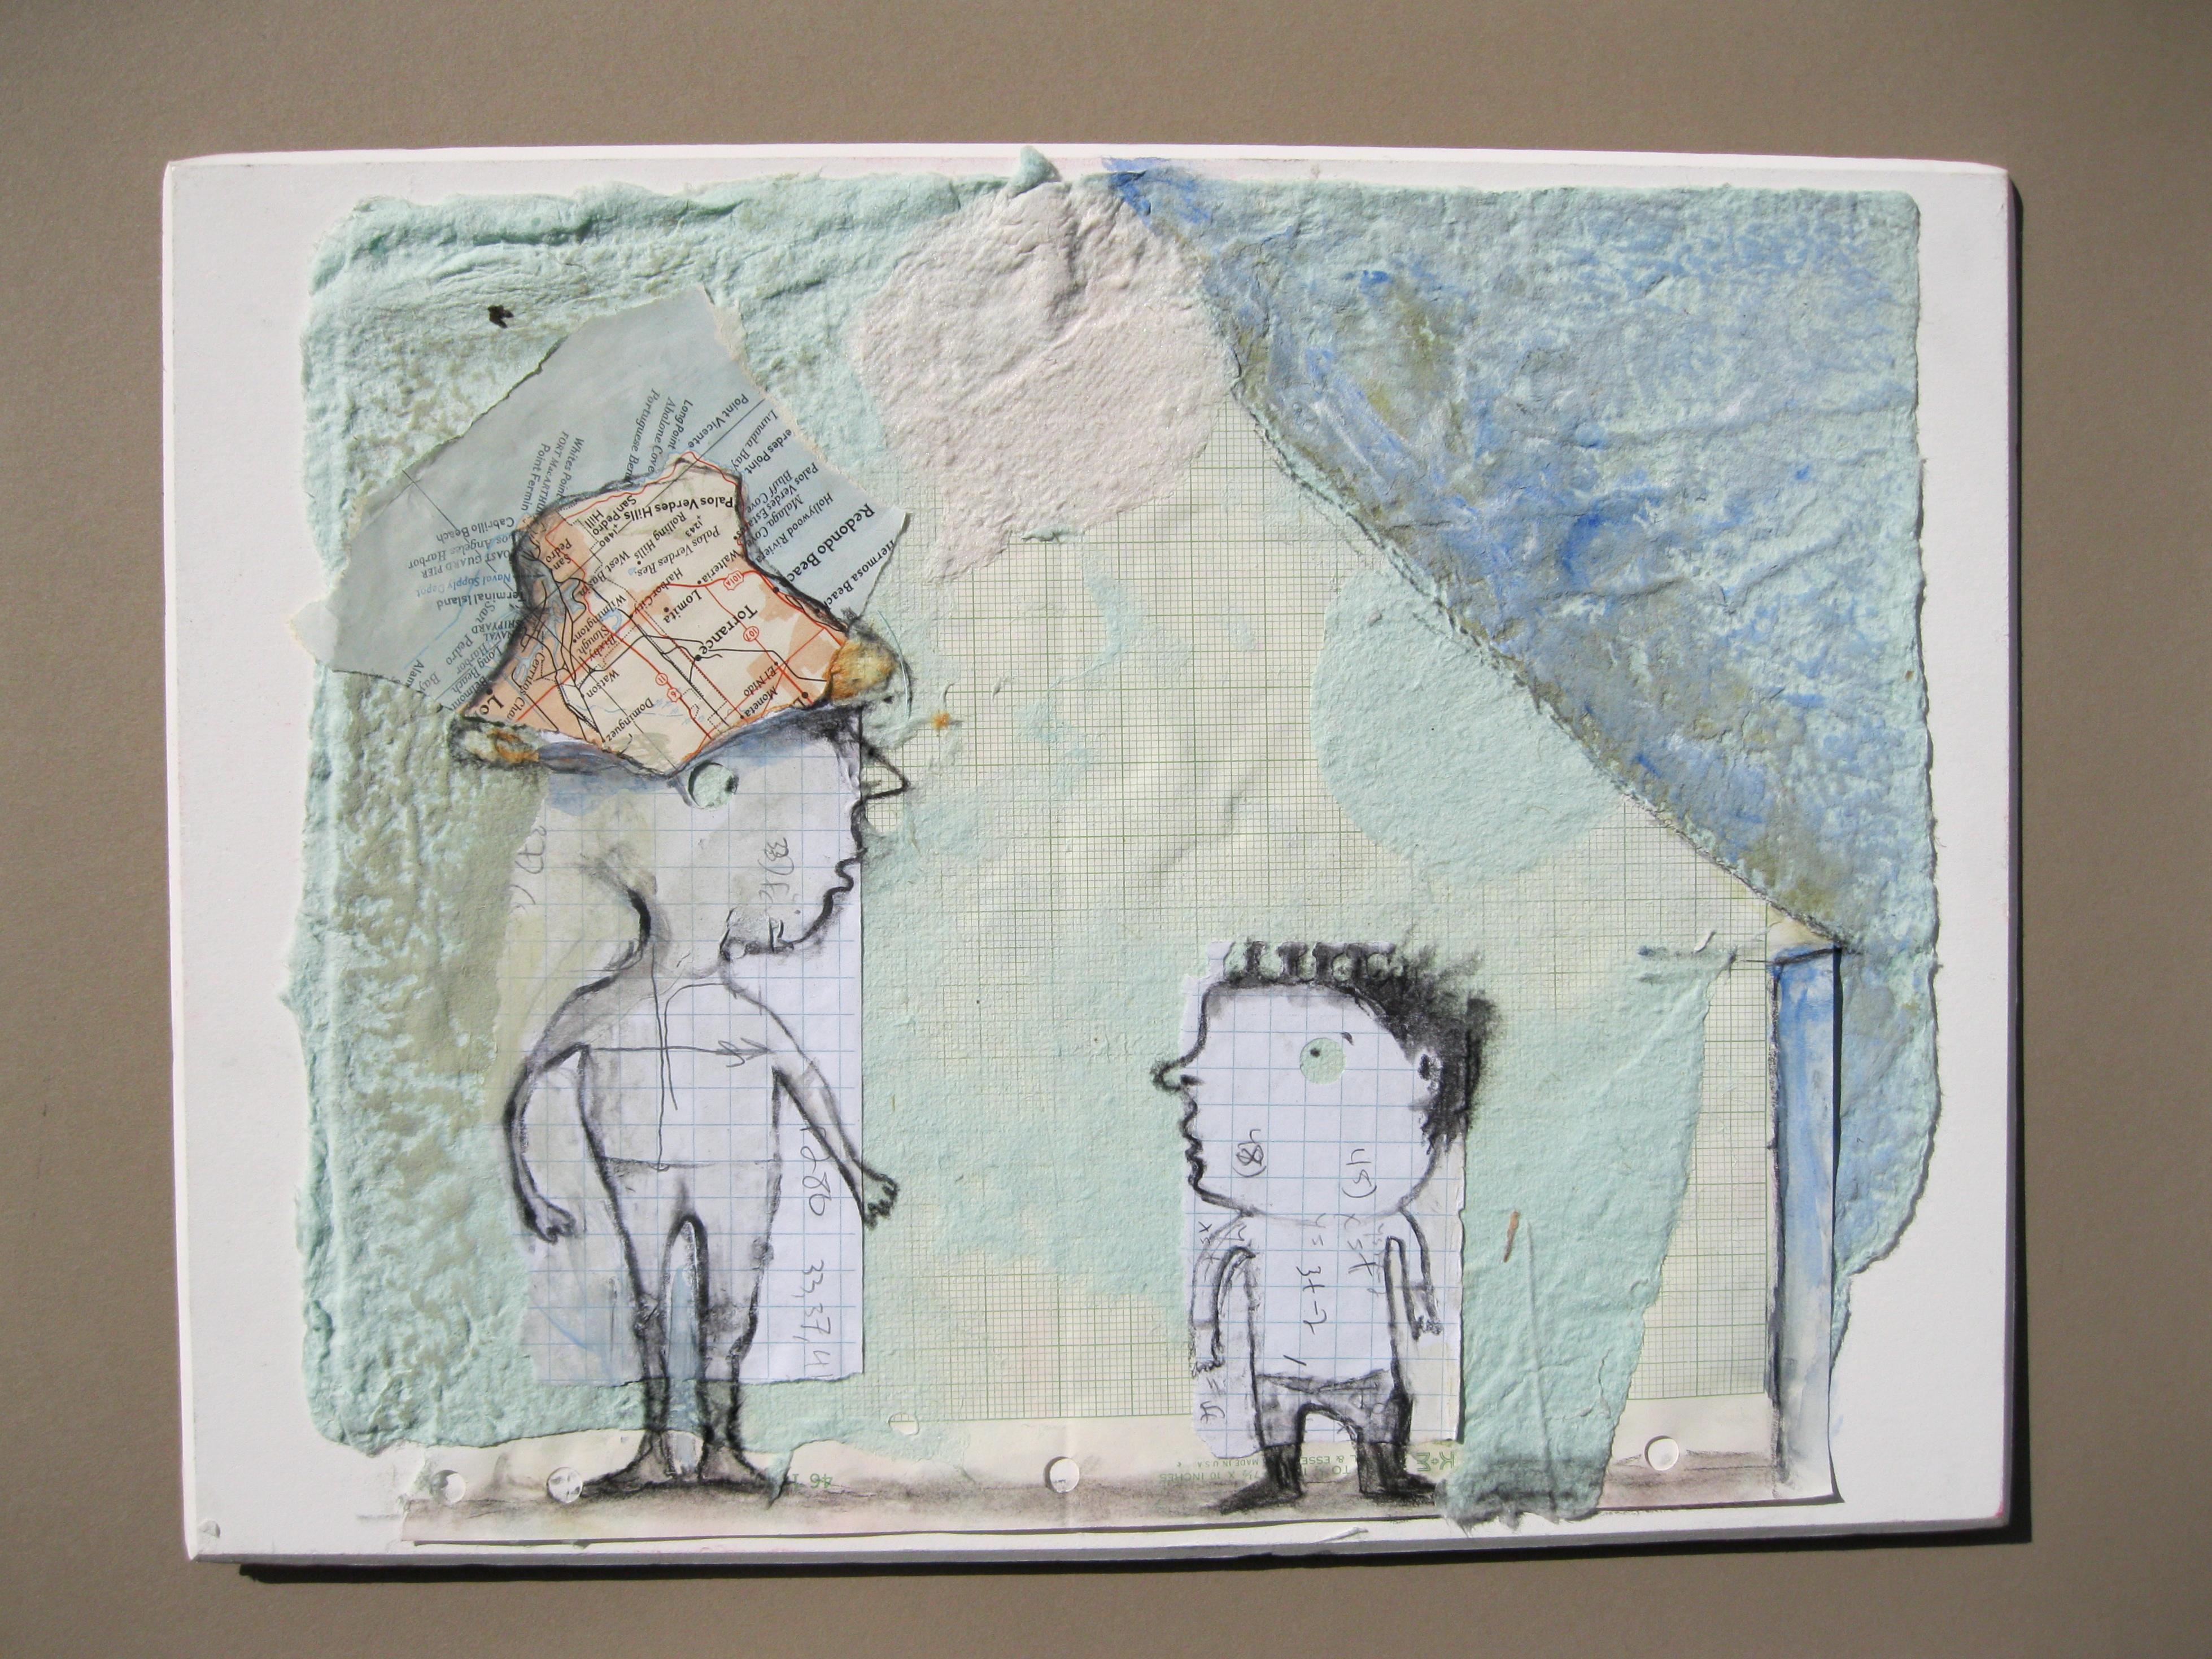 <p>Artist Comments<br /> ;Camping Trip; is a mixed media work on paper composed with pencil, charcoal, acrylic paint, graph paper, maps, and math homework on handmade paper. I incorporated graph paper into the handmade paper to create the tent